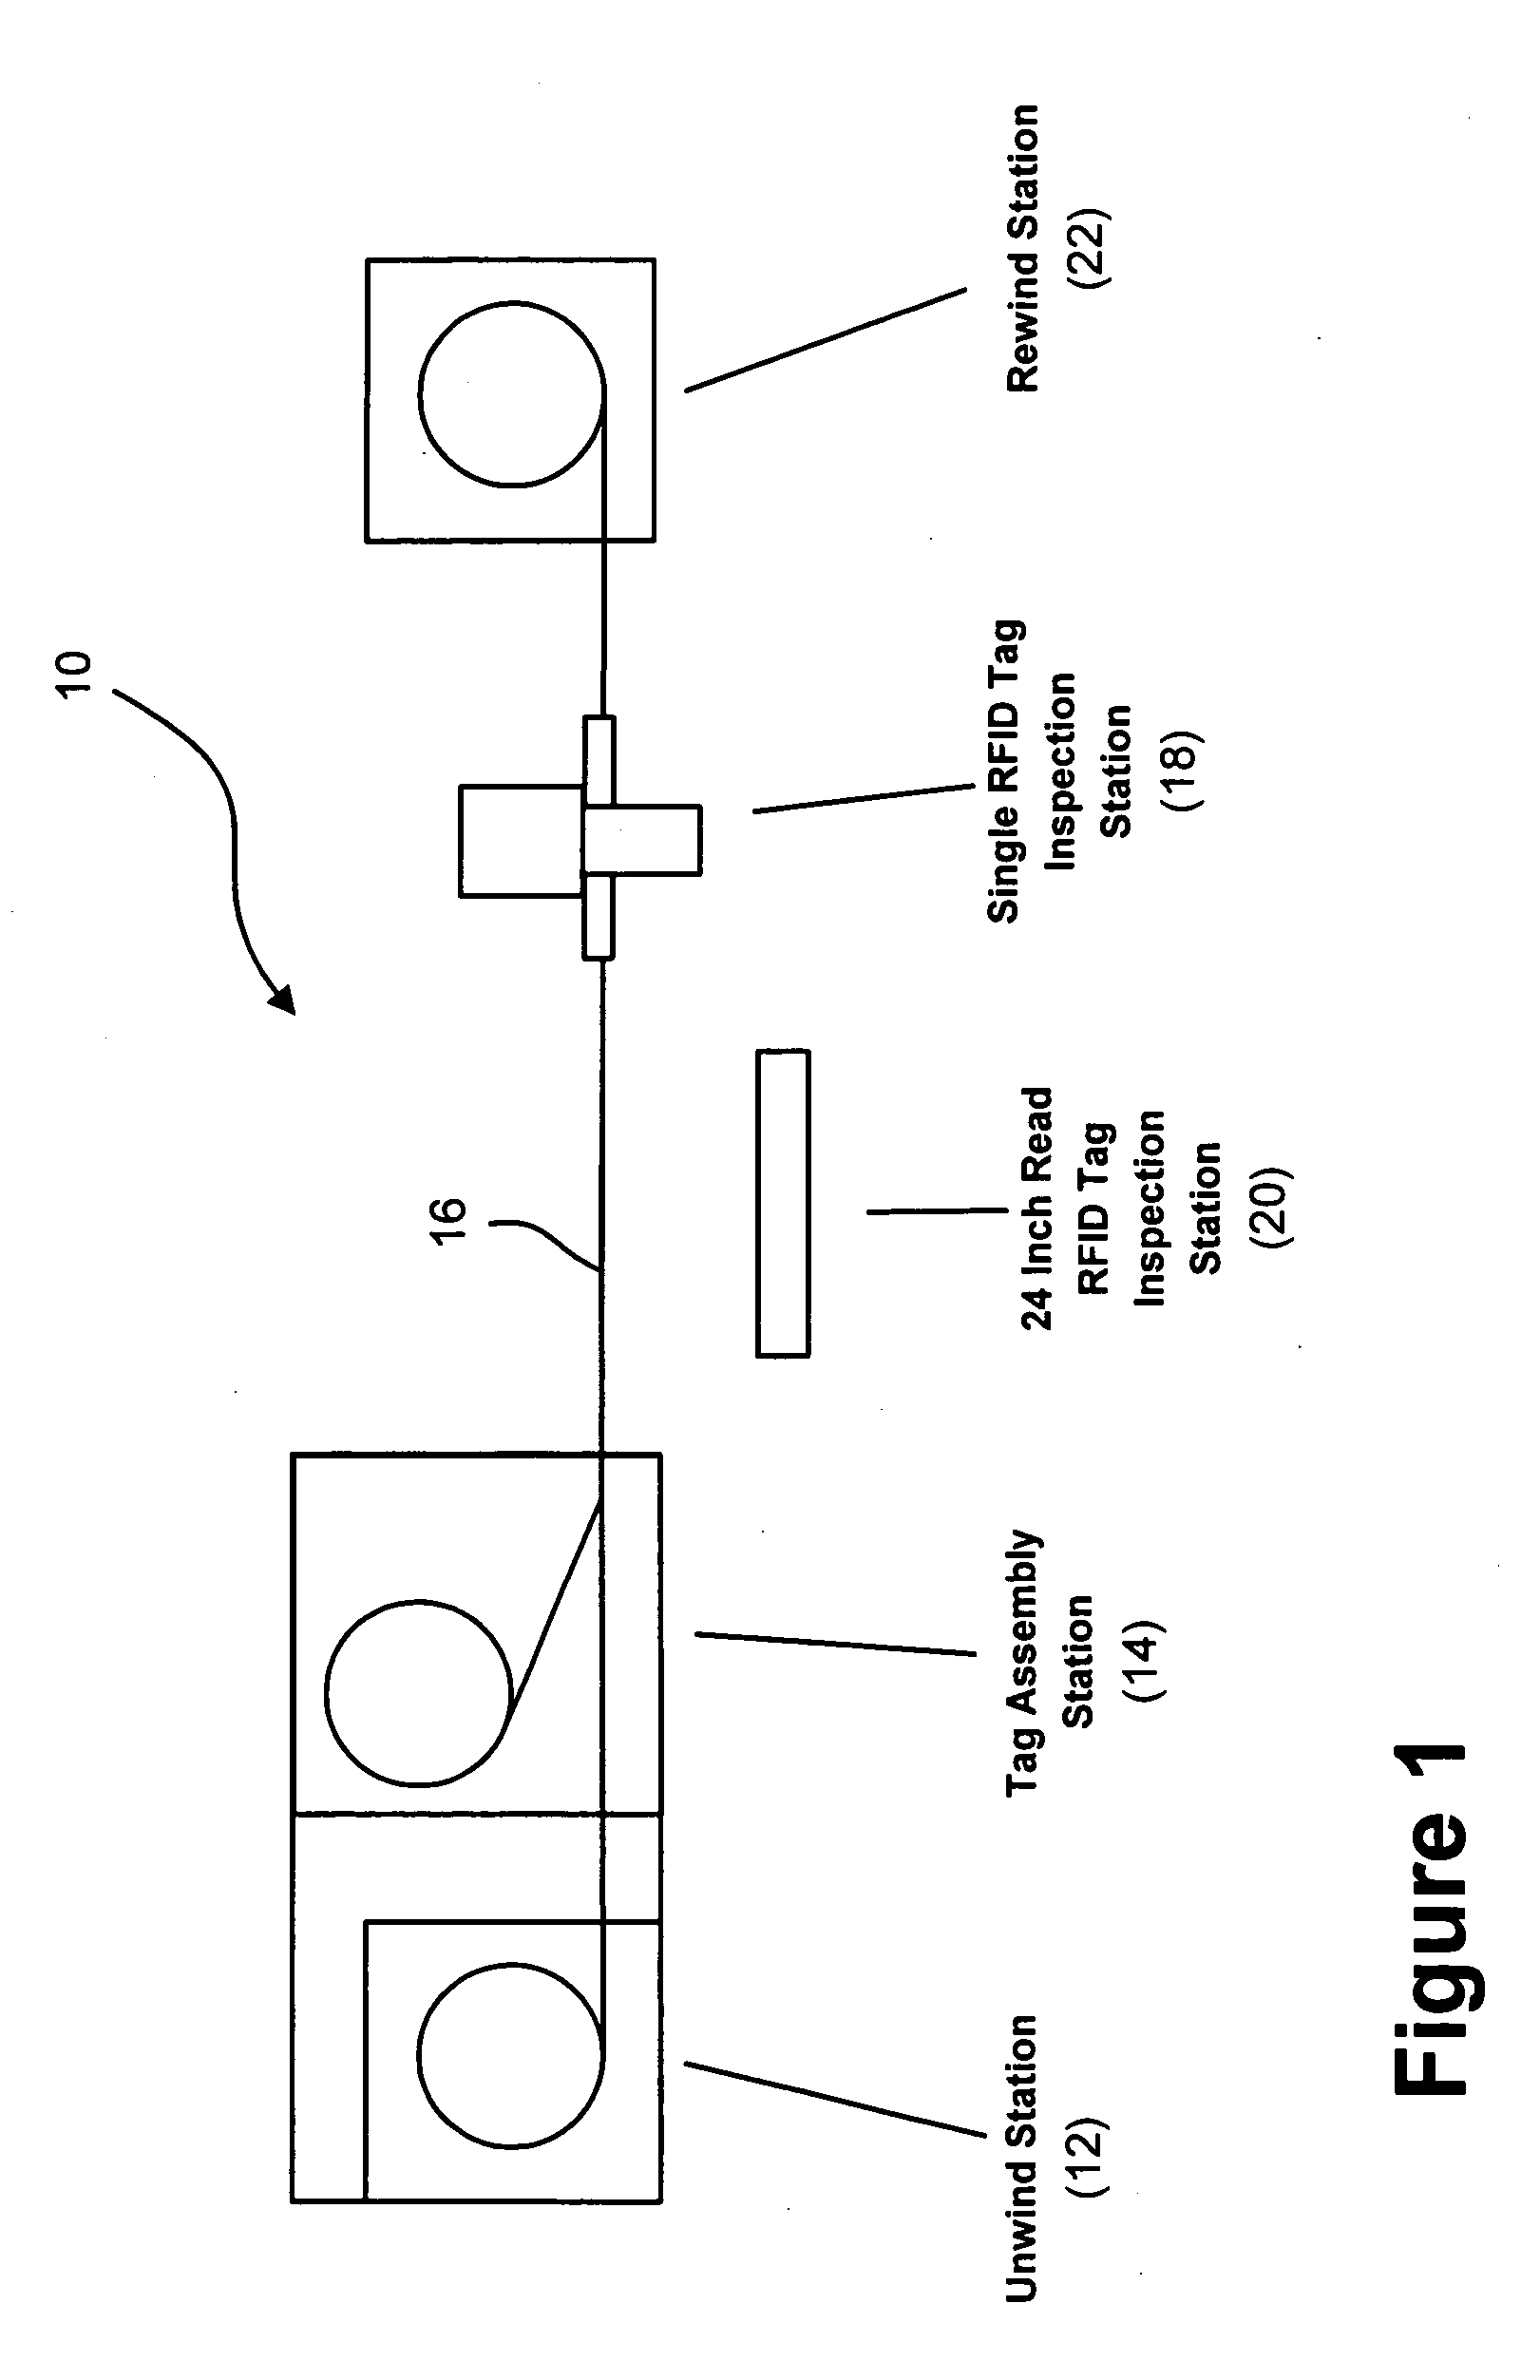 System and method for validating radio frequency identification tags